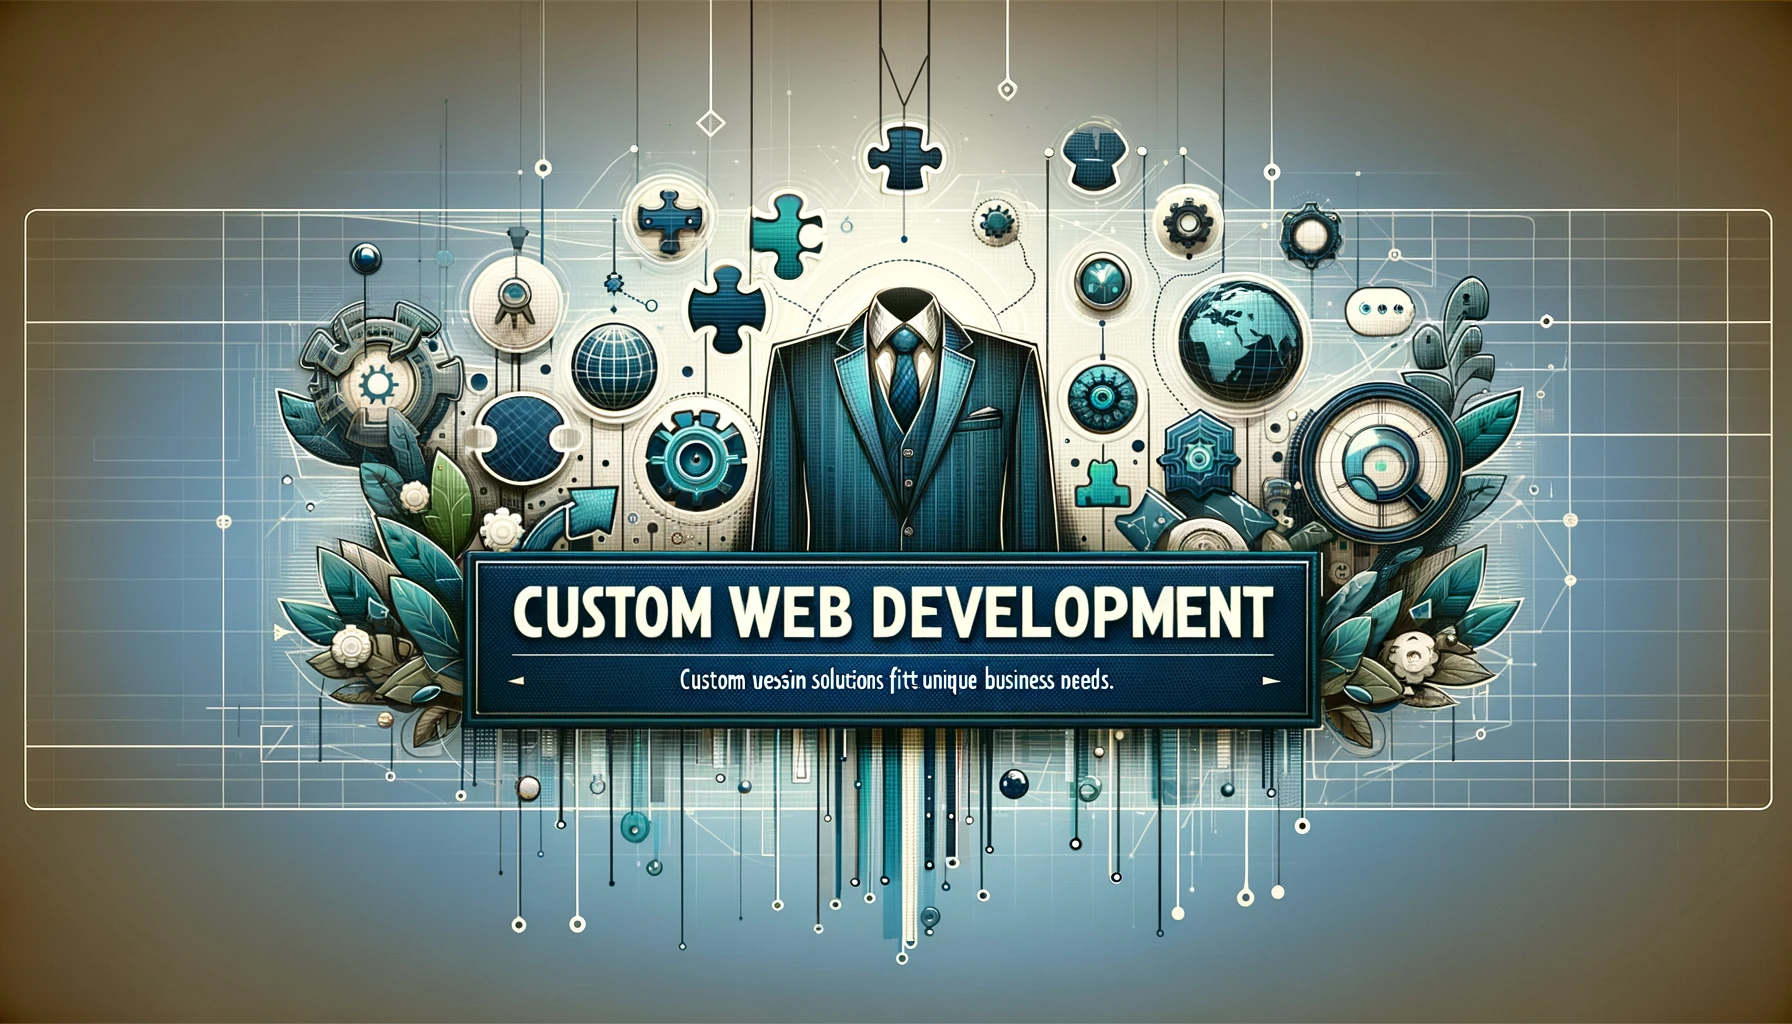 Web banner showcasing custom website development, featuring a modern design with technology and innovation elements, symbolizing unique business solutions.